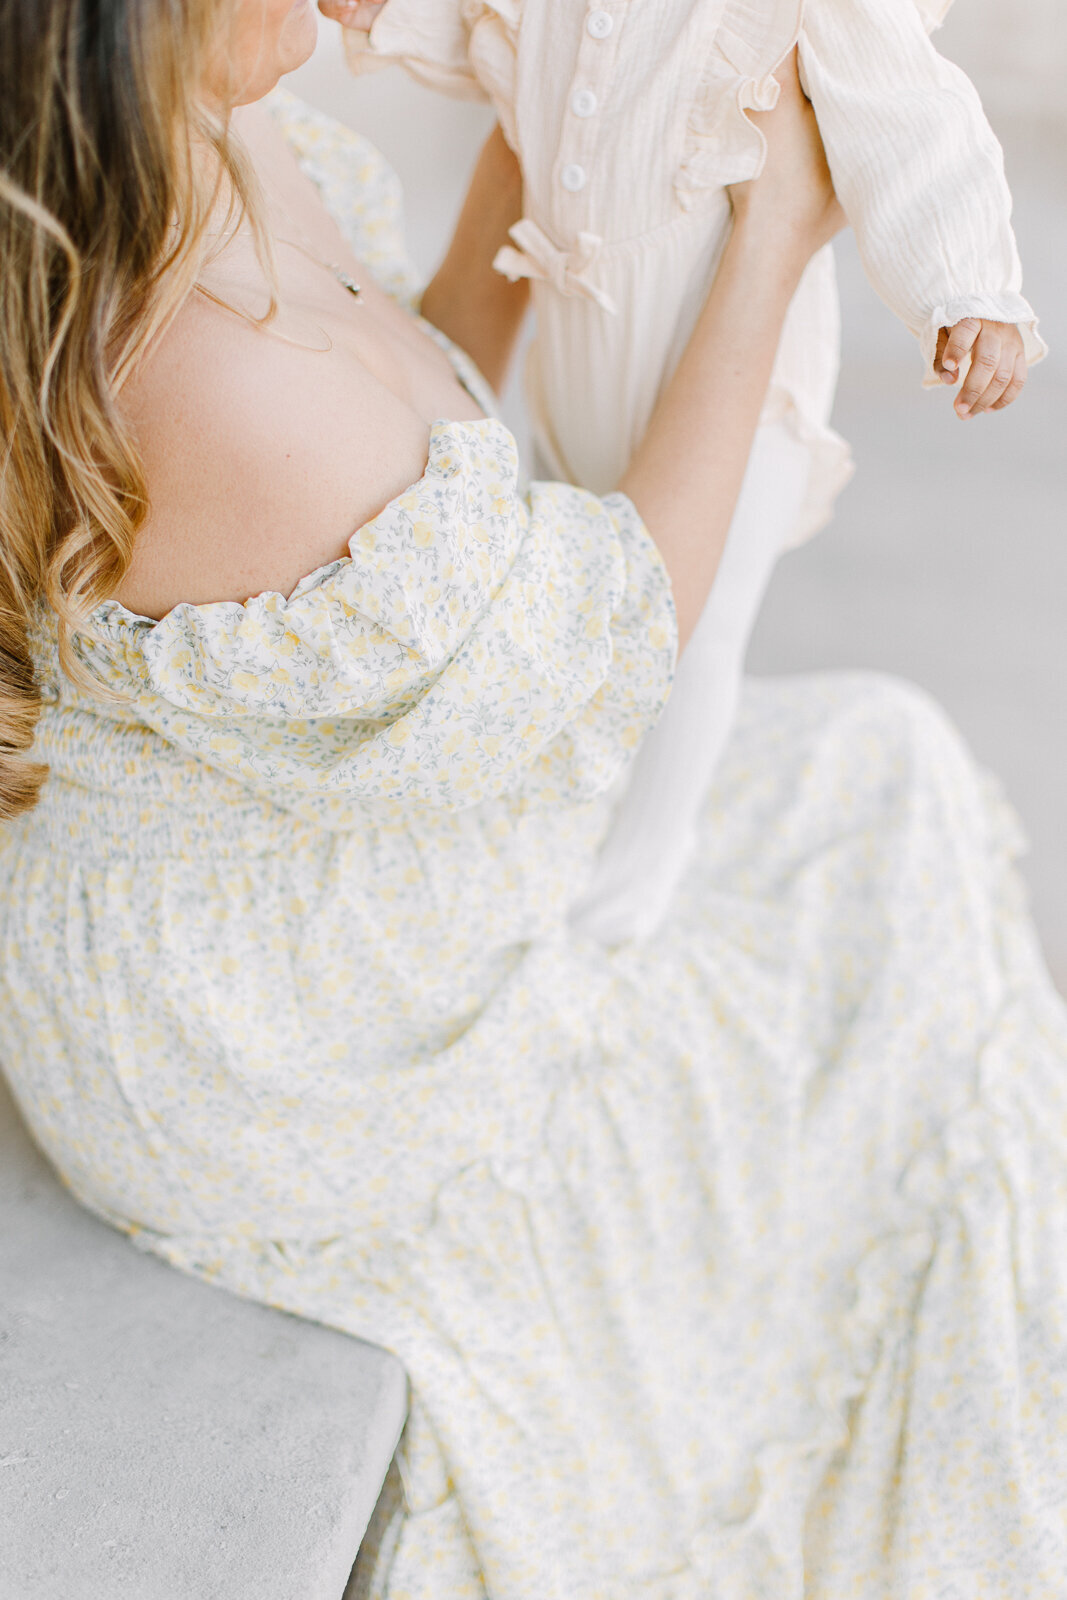 A close up detail shot of a mother's puffy sleeve while she lifts up her daughter during photo session with Boston family photographer Corinne Isabelle